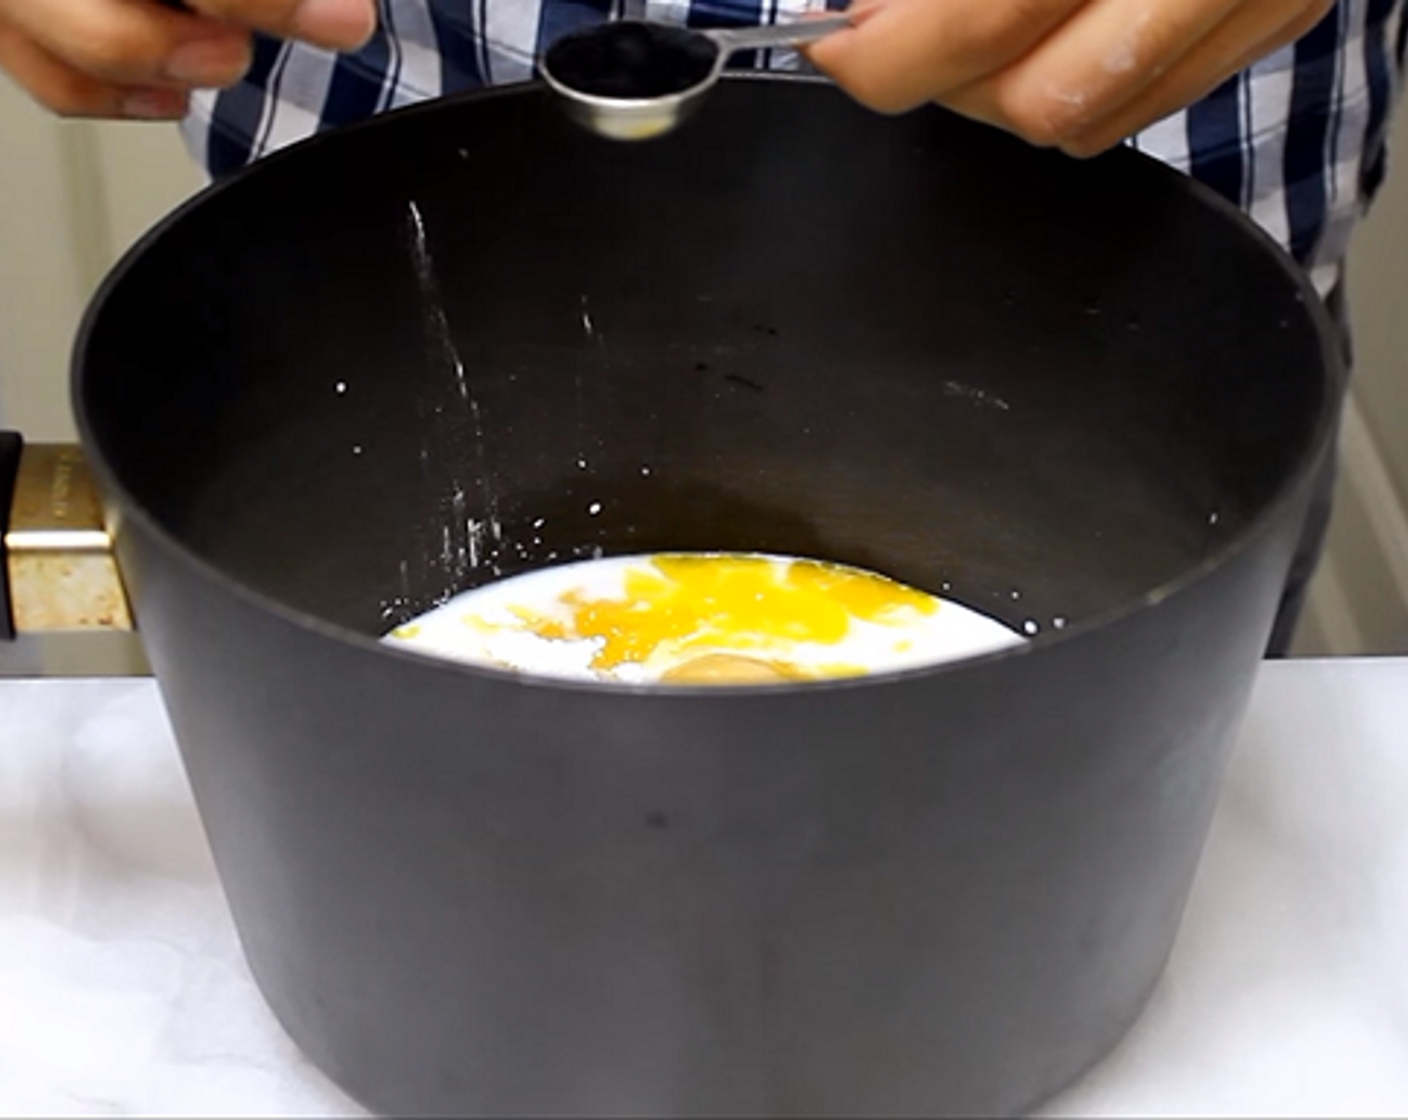 step 6 To make the custard, add Milk (1 cup), Granulated Sugar (1/4 cup), yolks from the remaining Eggs (2), Salt (1 pinch), Corn Starch (2 Tbsp), Vanilla Extract (1 tsp) to a large saucepan and mix.